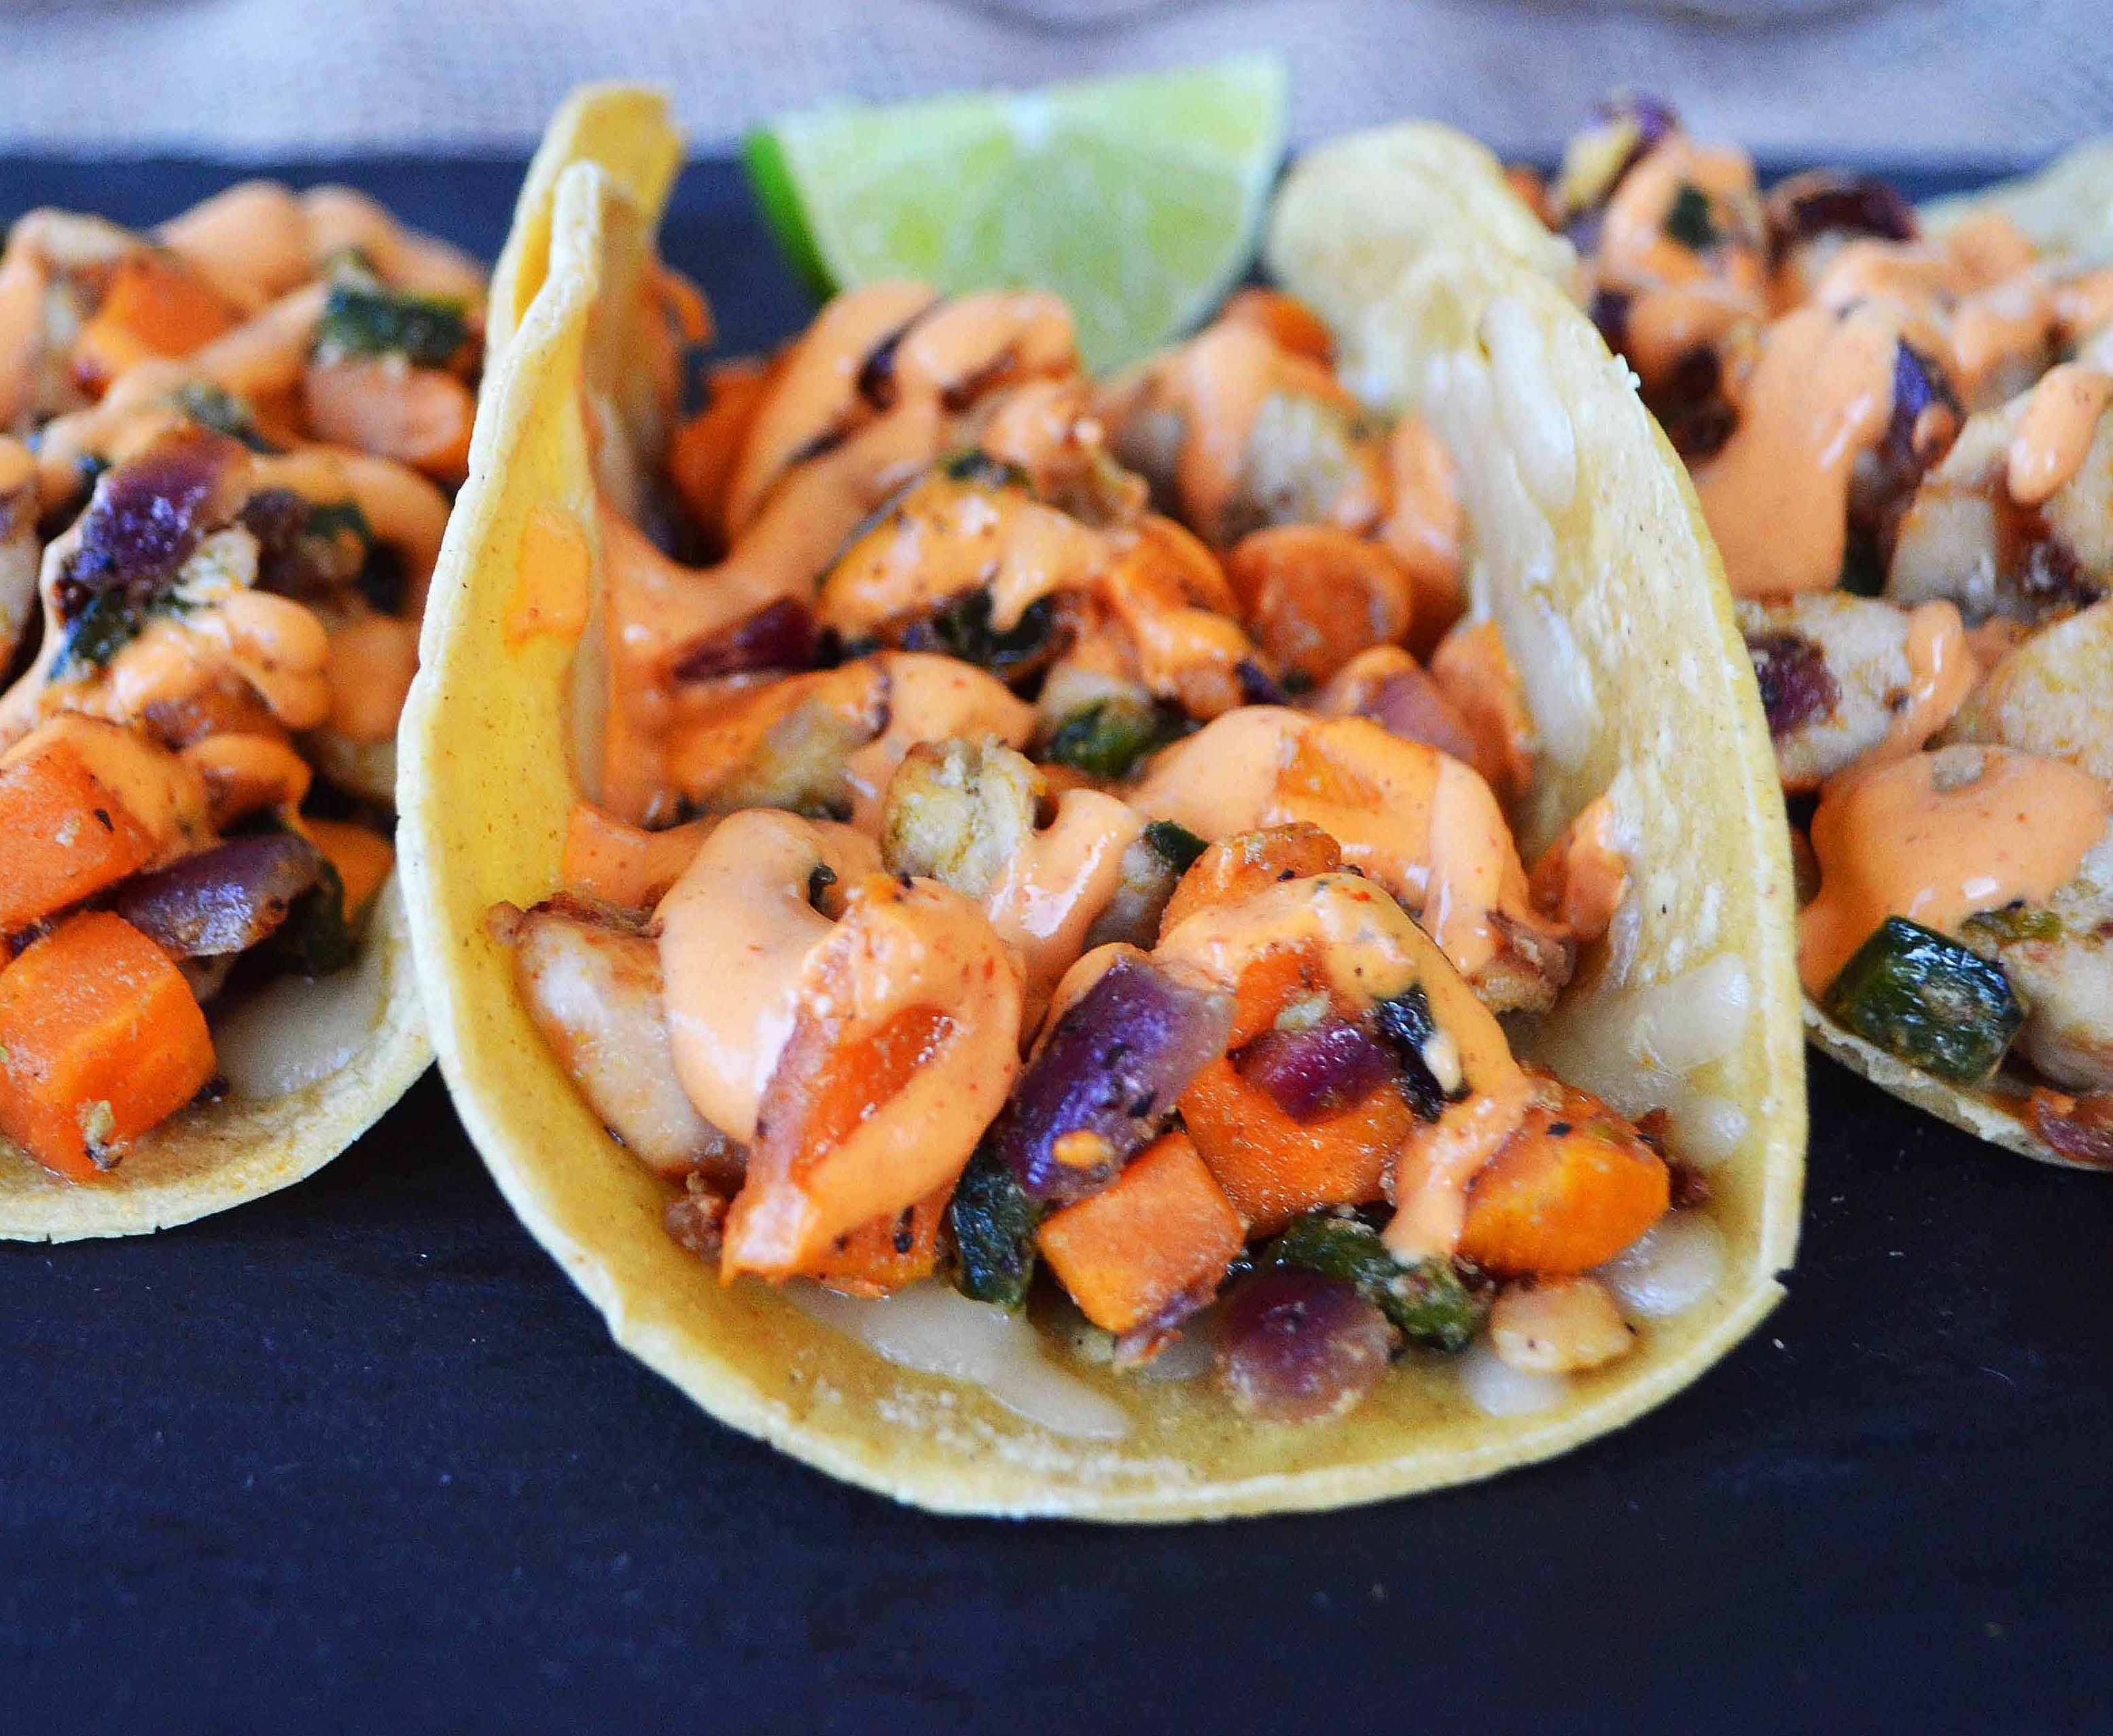 Chicken Poblano Sweet Potato Tacos with Chipotle Cream. Flavorful and slightly spicy chicken and veggies tacos on corn tortillas. www.modernhoney.com #mexicanfood #mexican #tacos #taco 